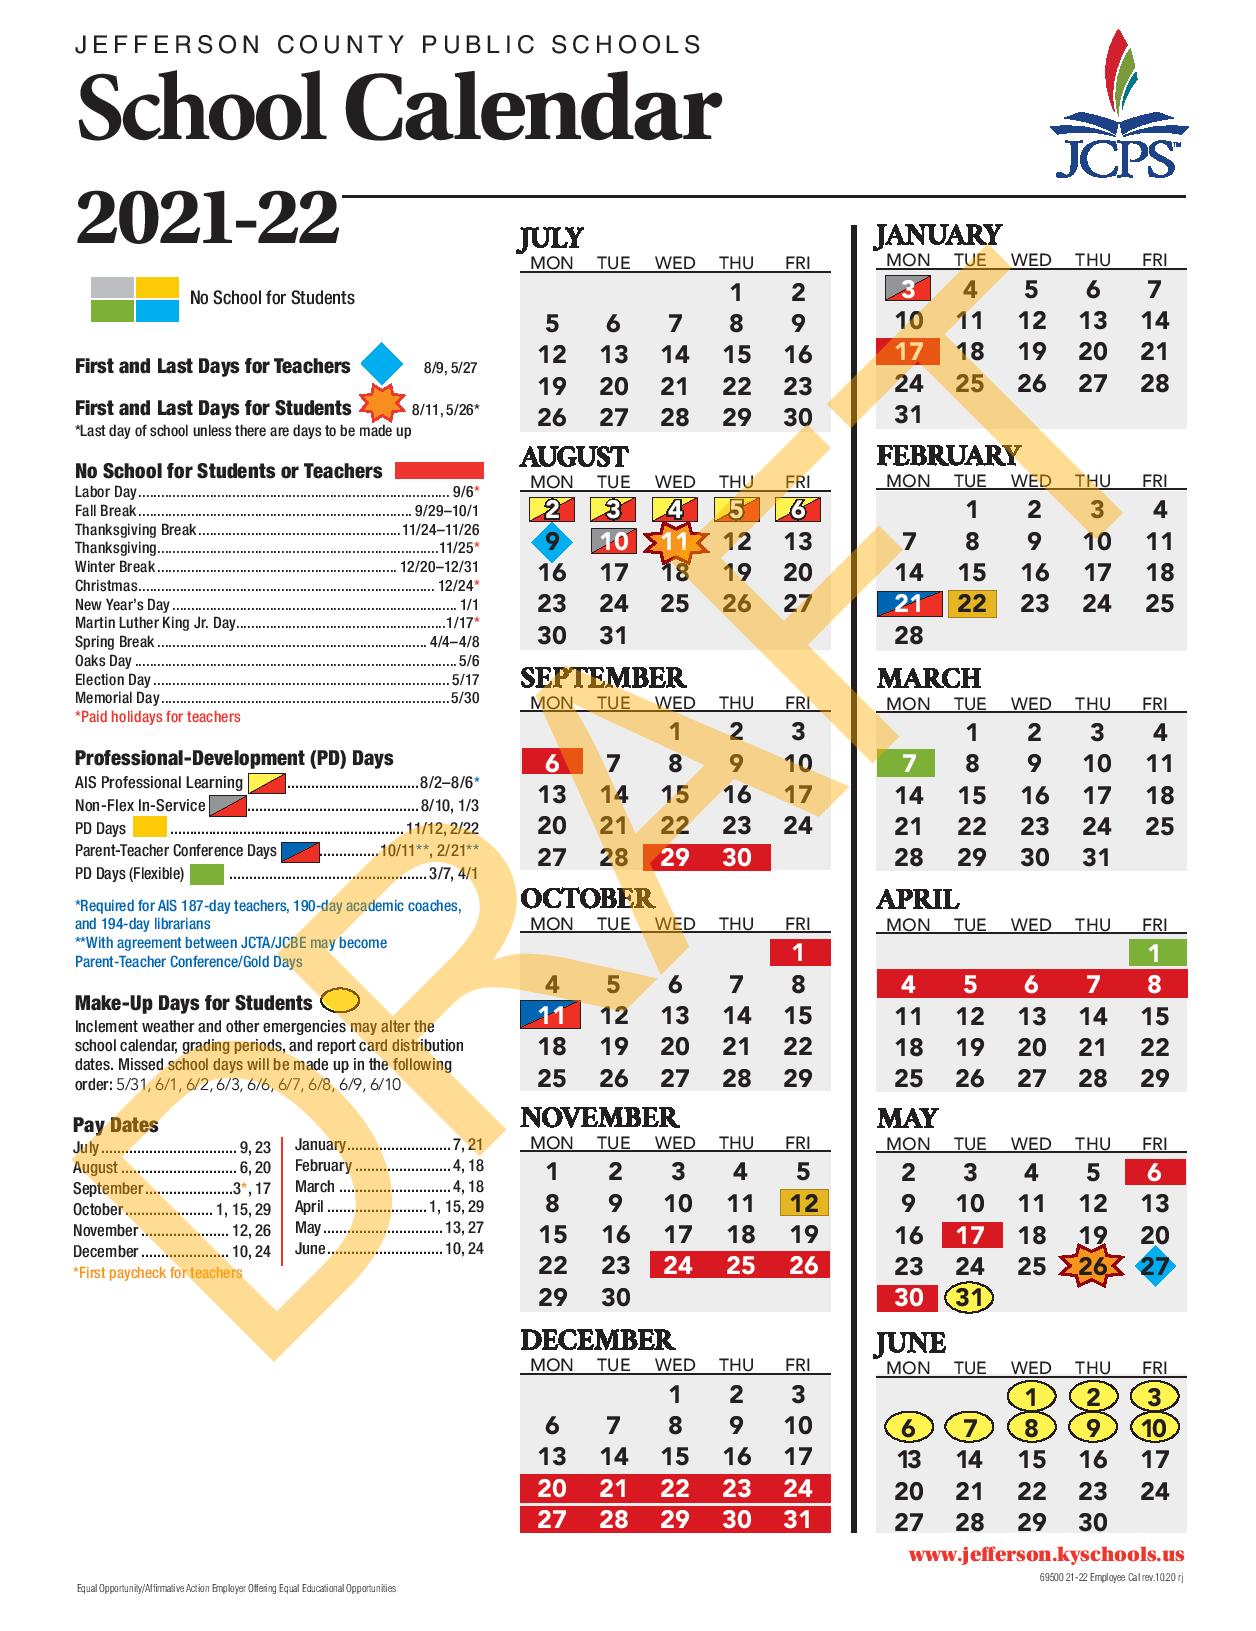 Jcps Schedule 2022 23 Jcps On Twitter: "🗓️ The Board Approved The 2021-2022 School Calendar.  Highlights Include A Mid-August Start Date, A Fall Break In Late September  & Early October, A Winter Break, A Spring Break,